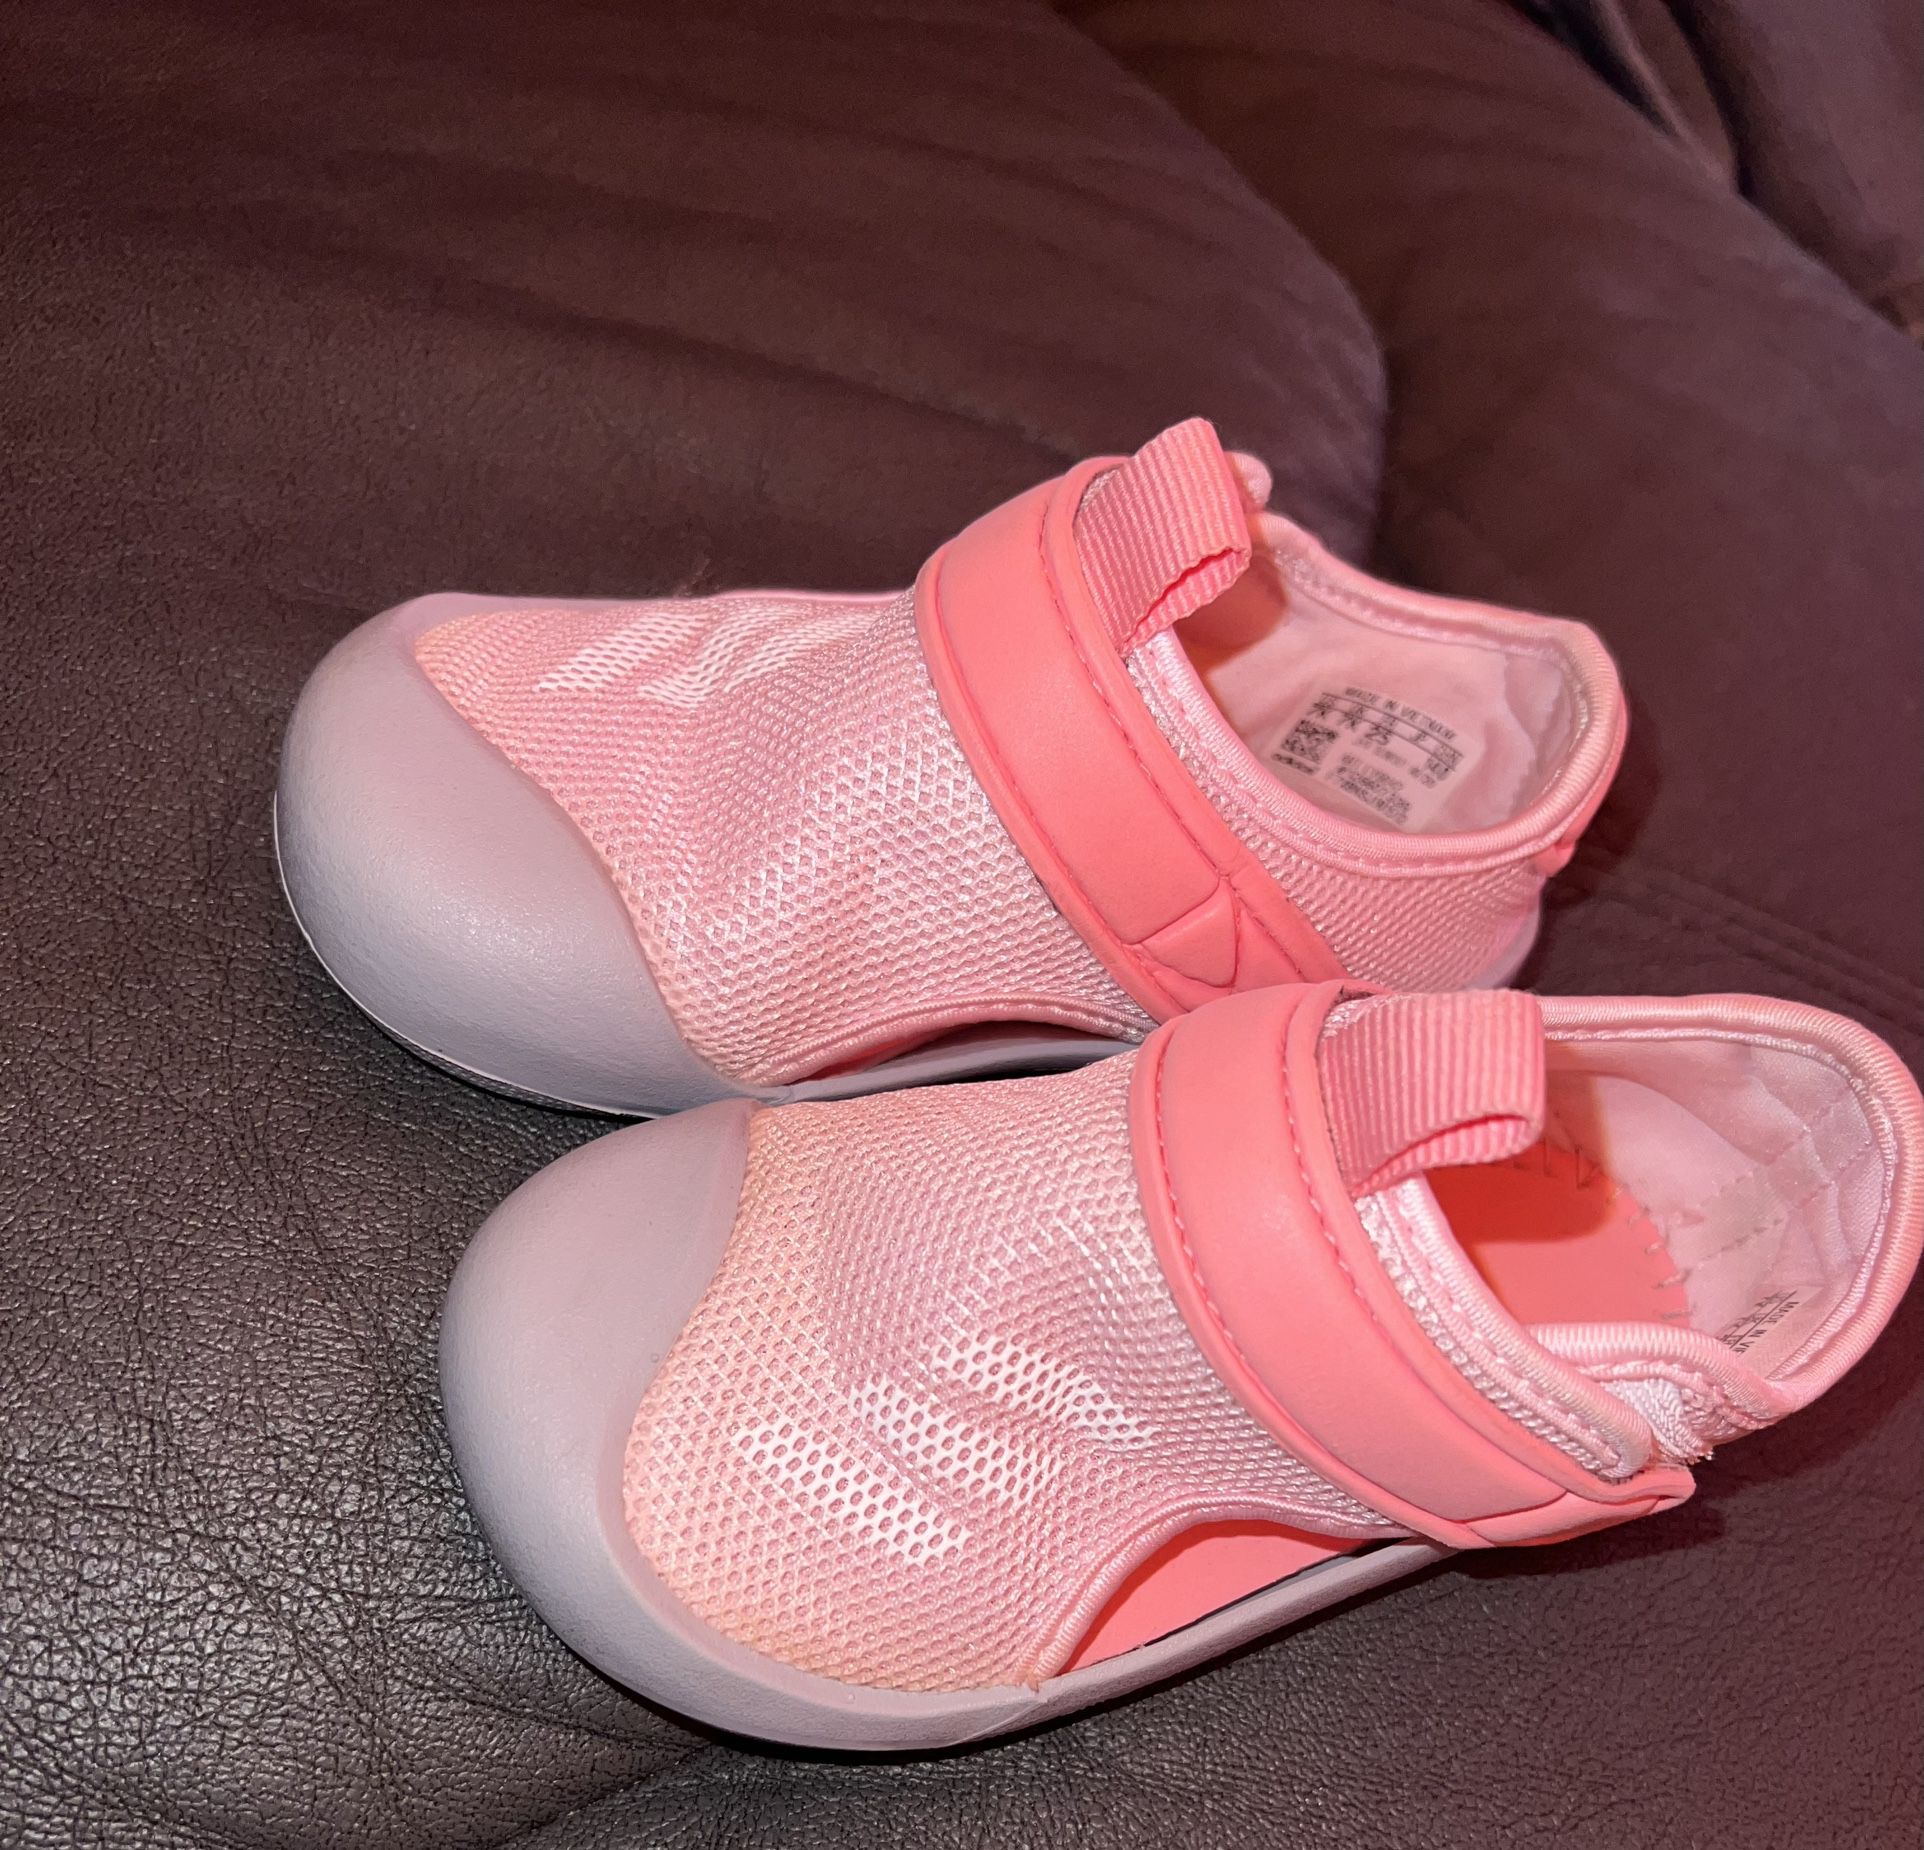 Adidas Girl Shoes/Sandals